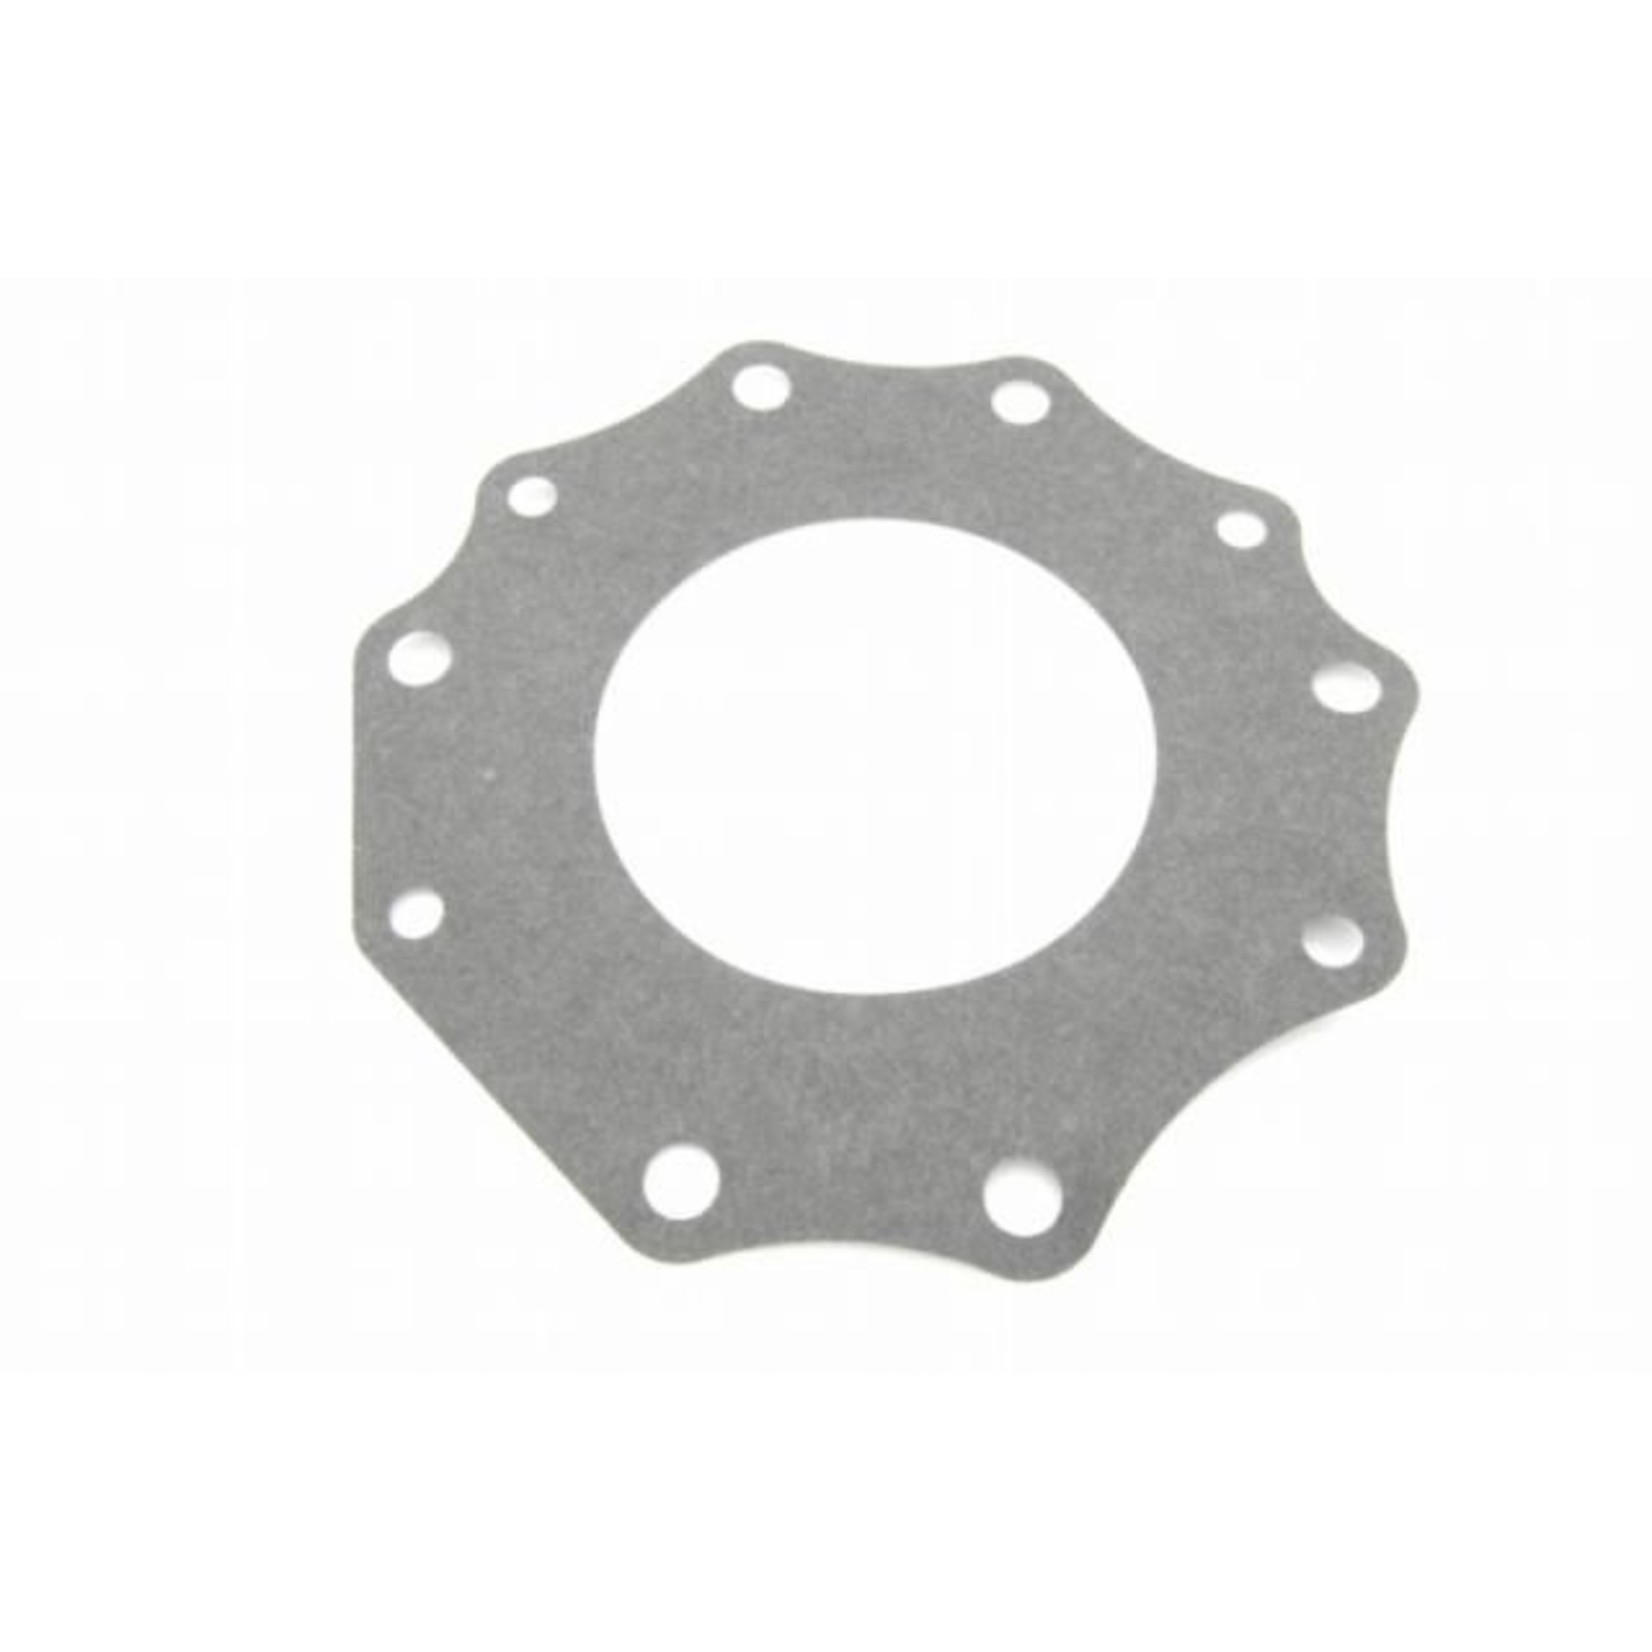 Gasket driving house plate Nr Org: 5409967